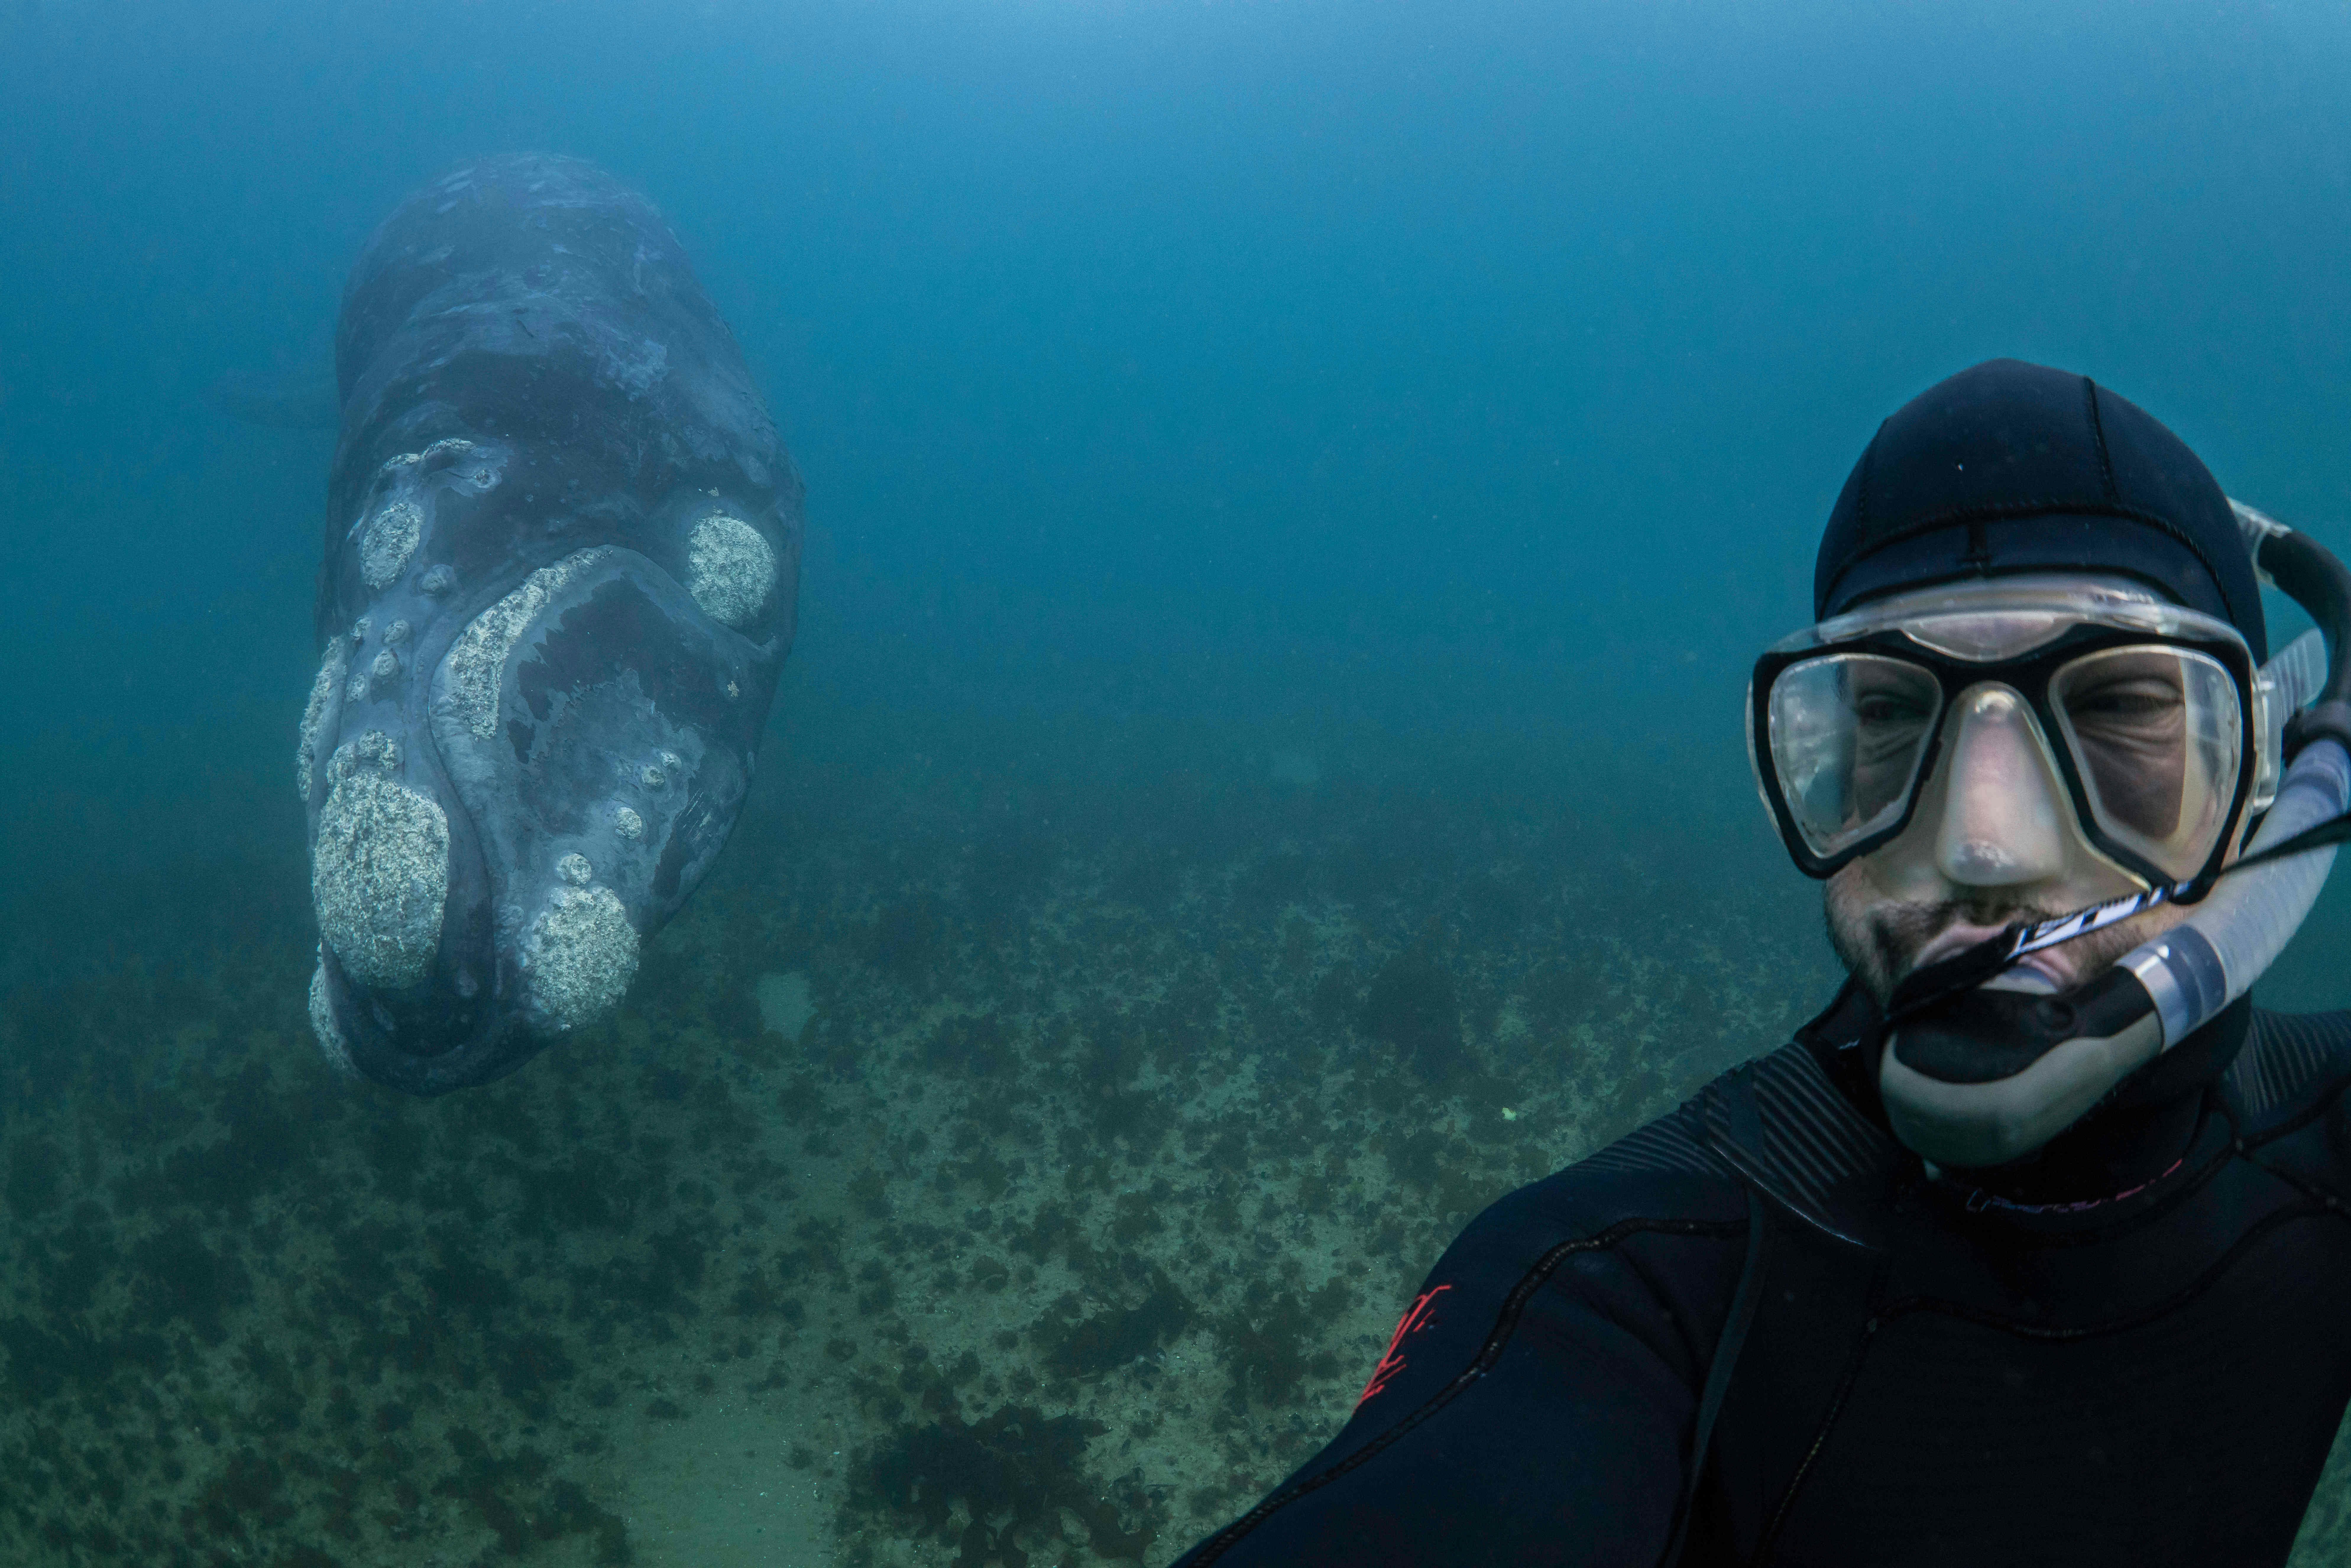 A diver takes a picture of himself next to a huge southern right whale that is swimming along the bottom of the ocean; the head of the whale is encrusted with barnacles.